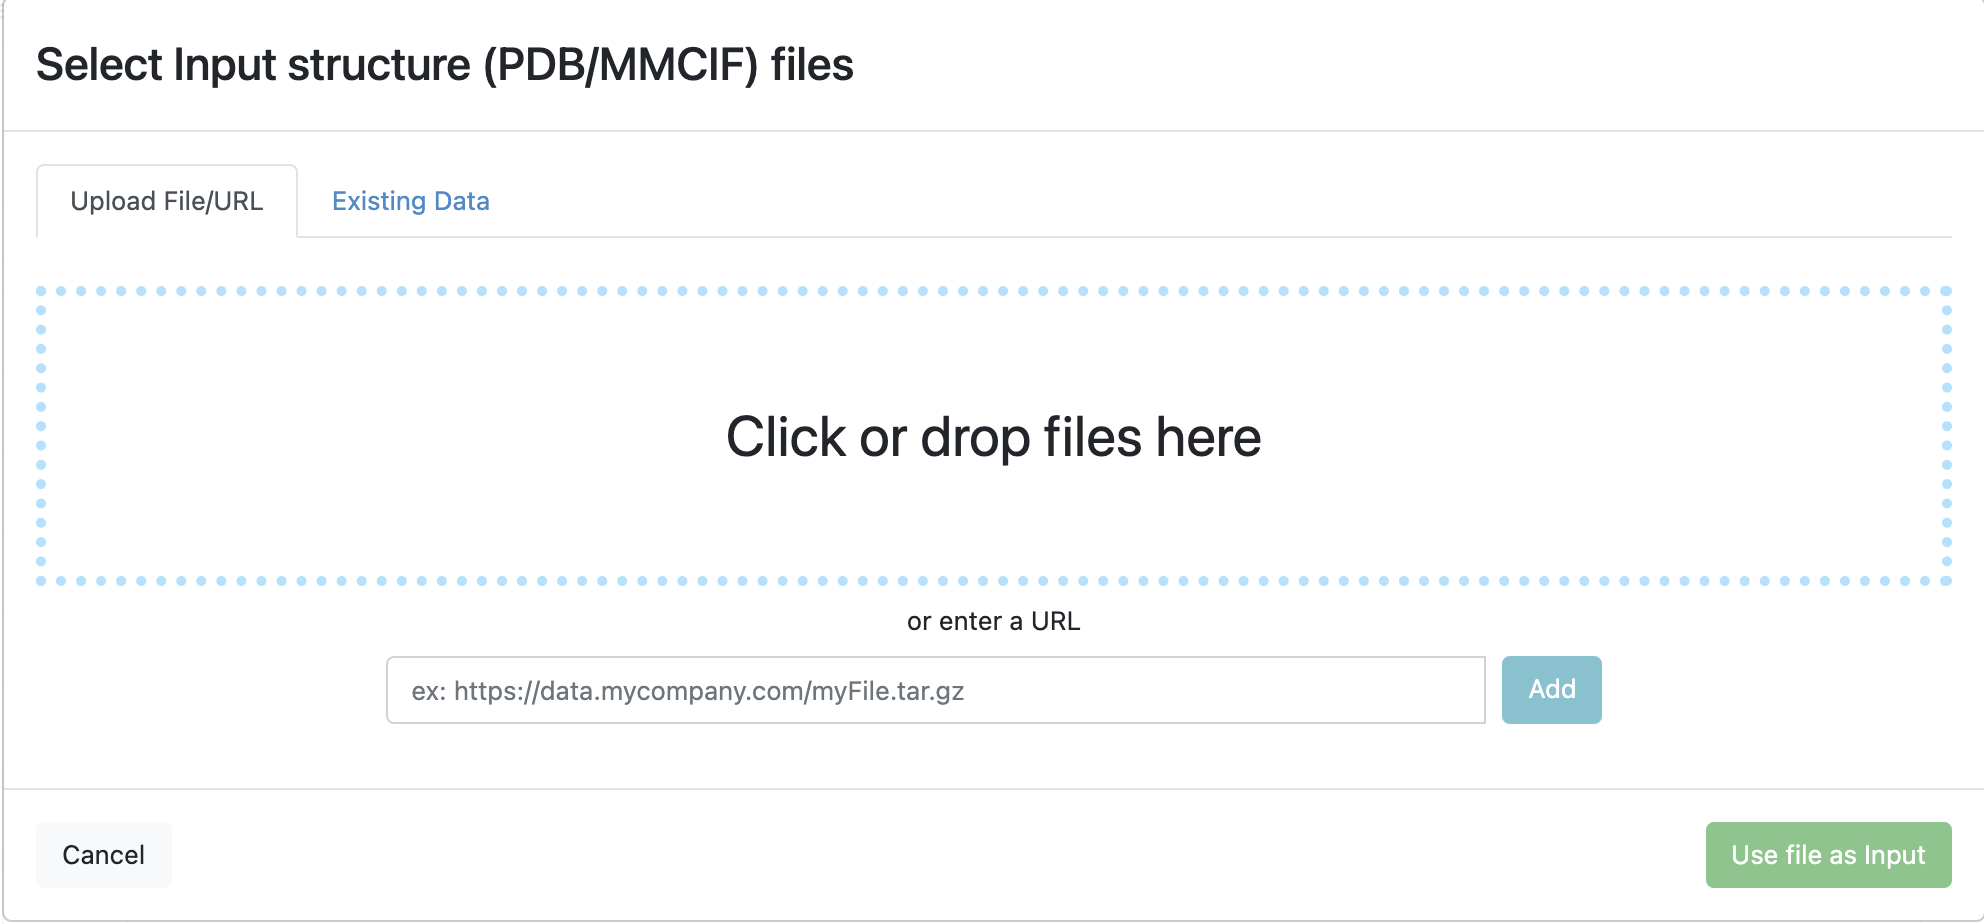 Files can be uploaded or existing files in Orion can be used